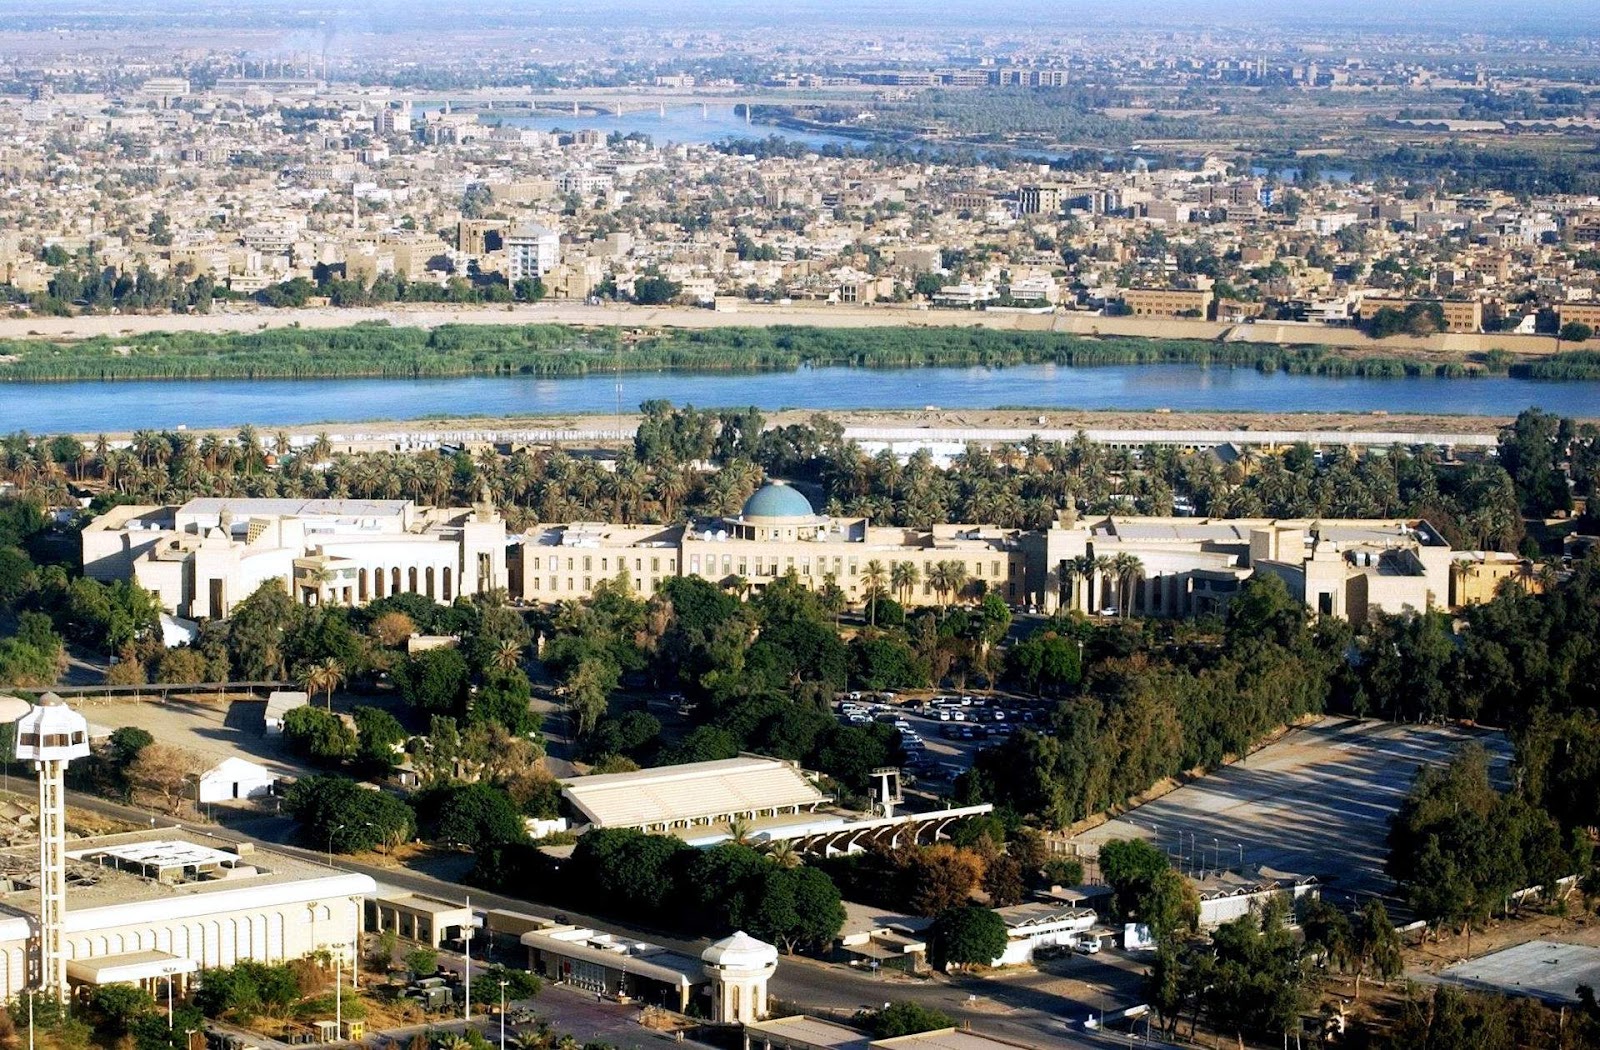 The Green Zone in Baghdad Iraq